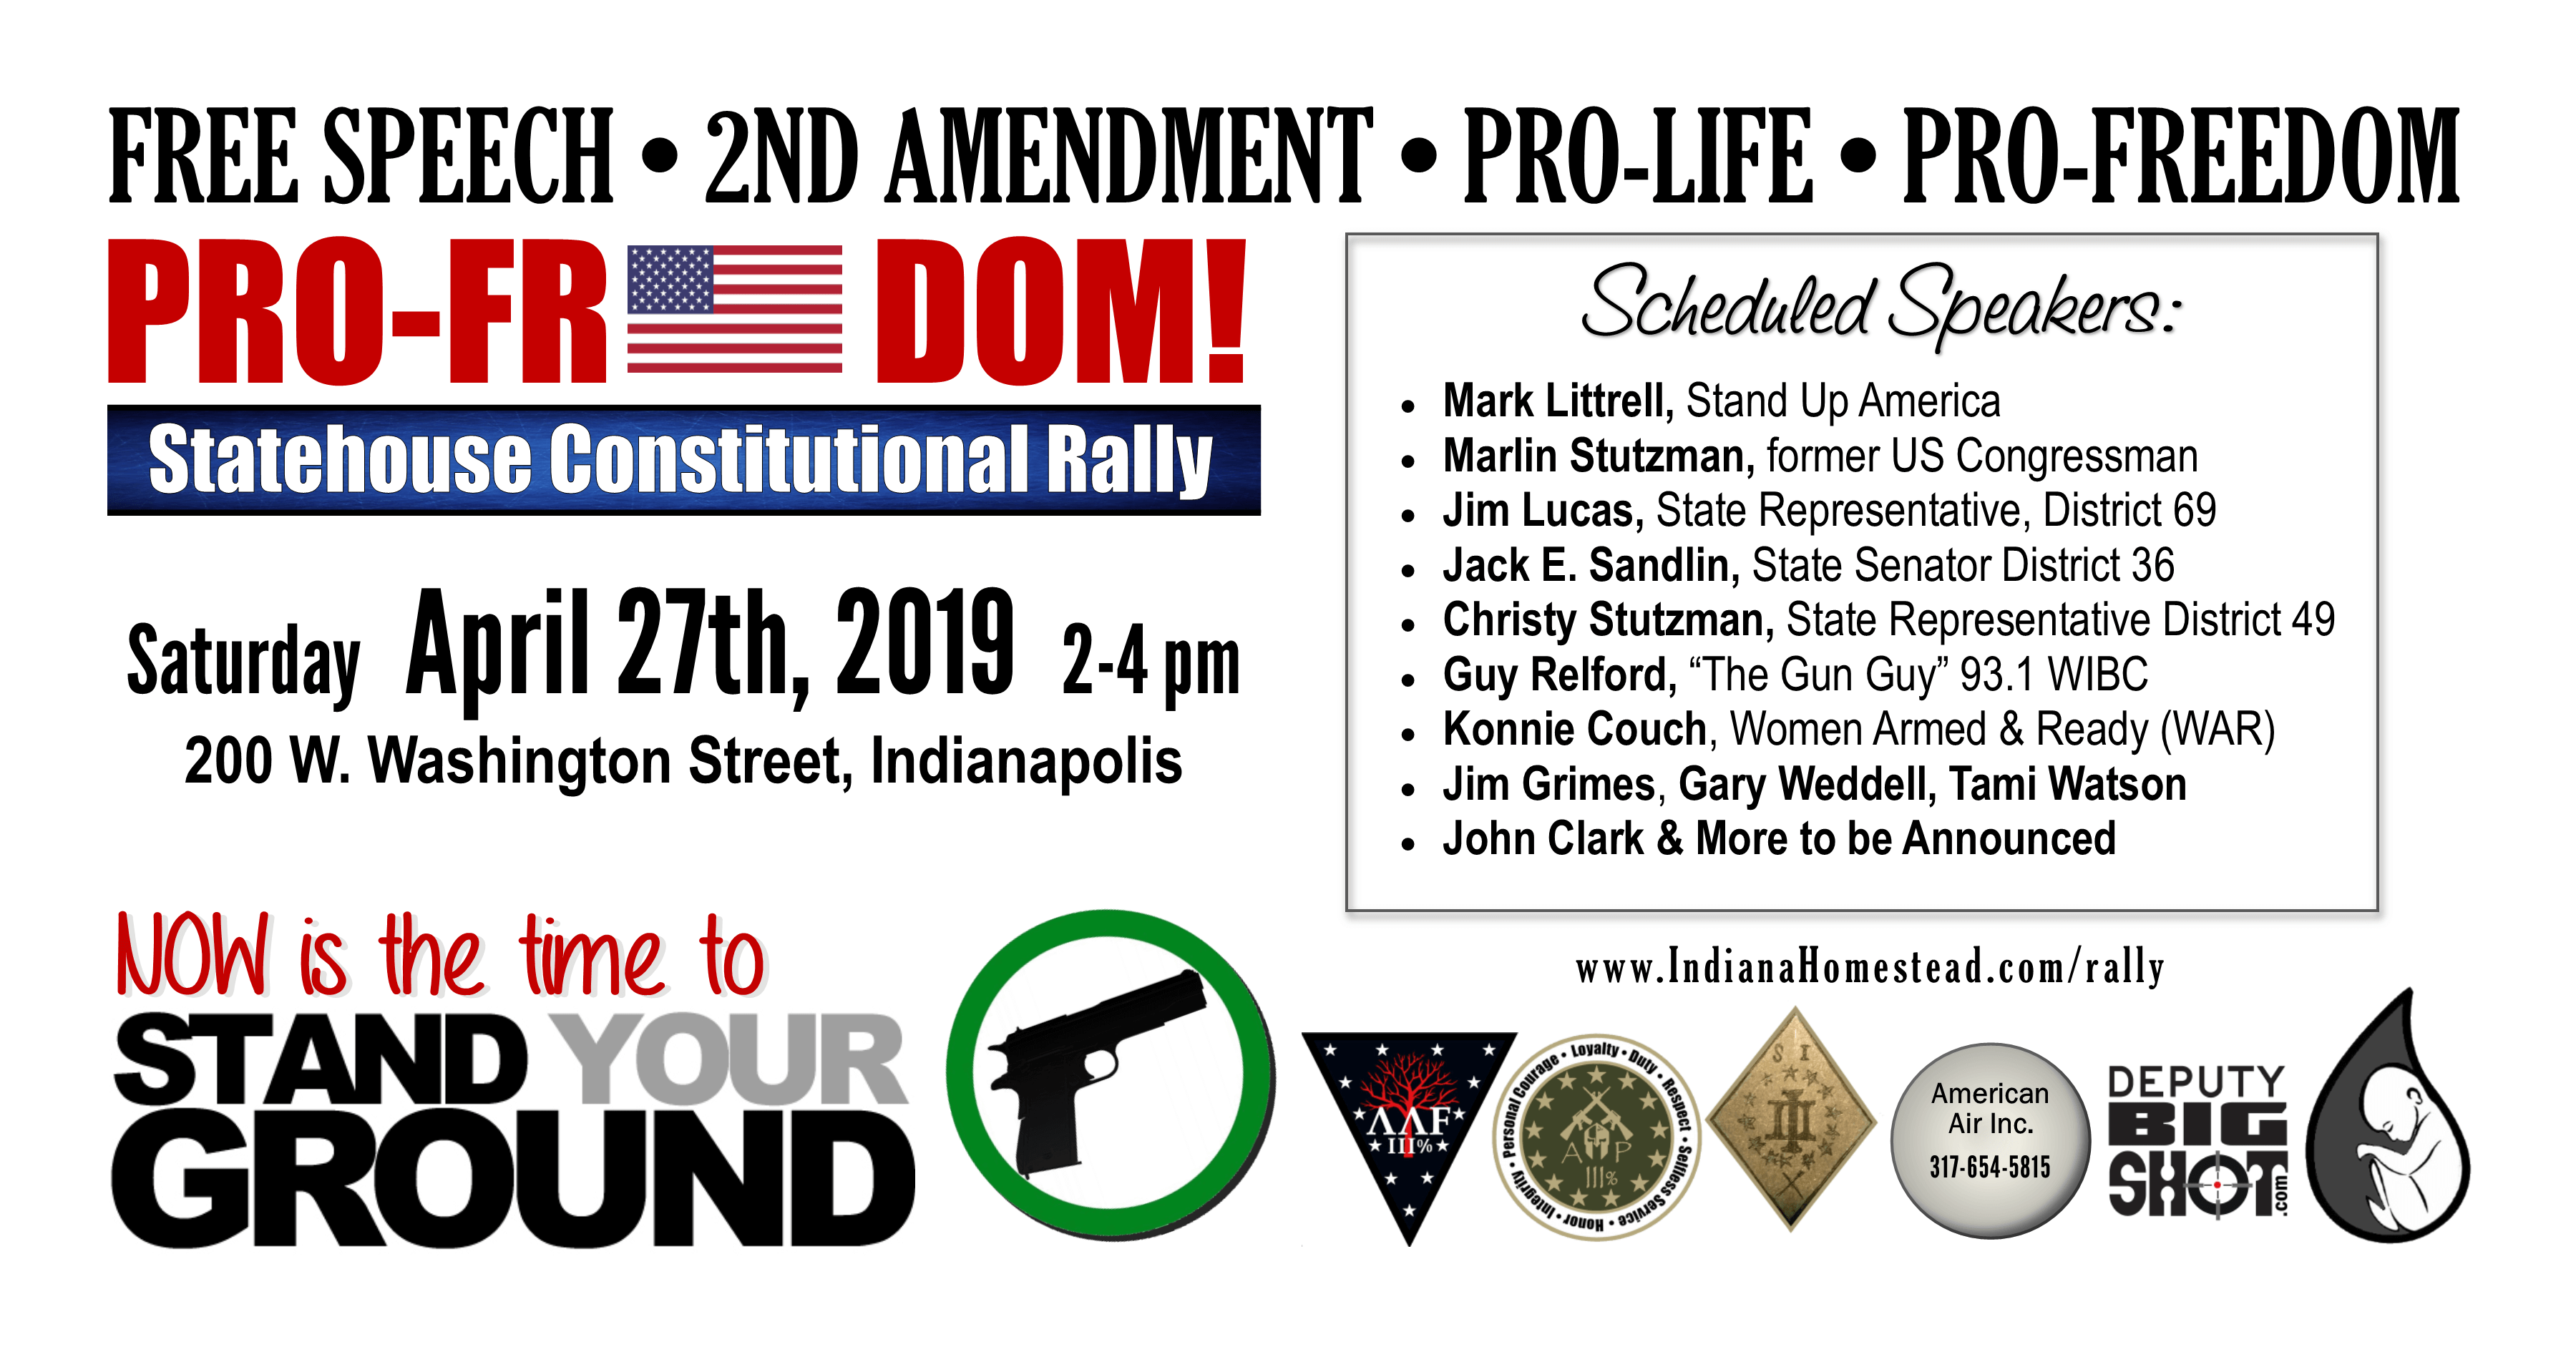 FREEdom Statehouse Rally 4/27/2019 2-4 pm EDT